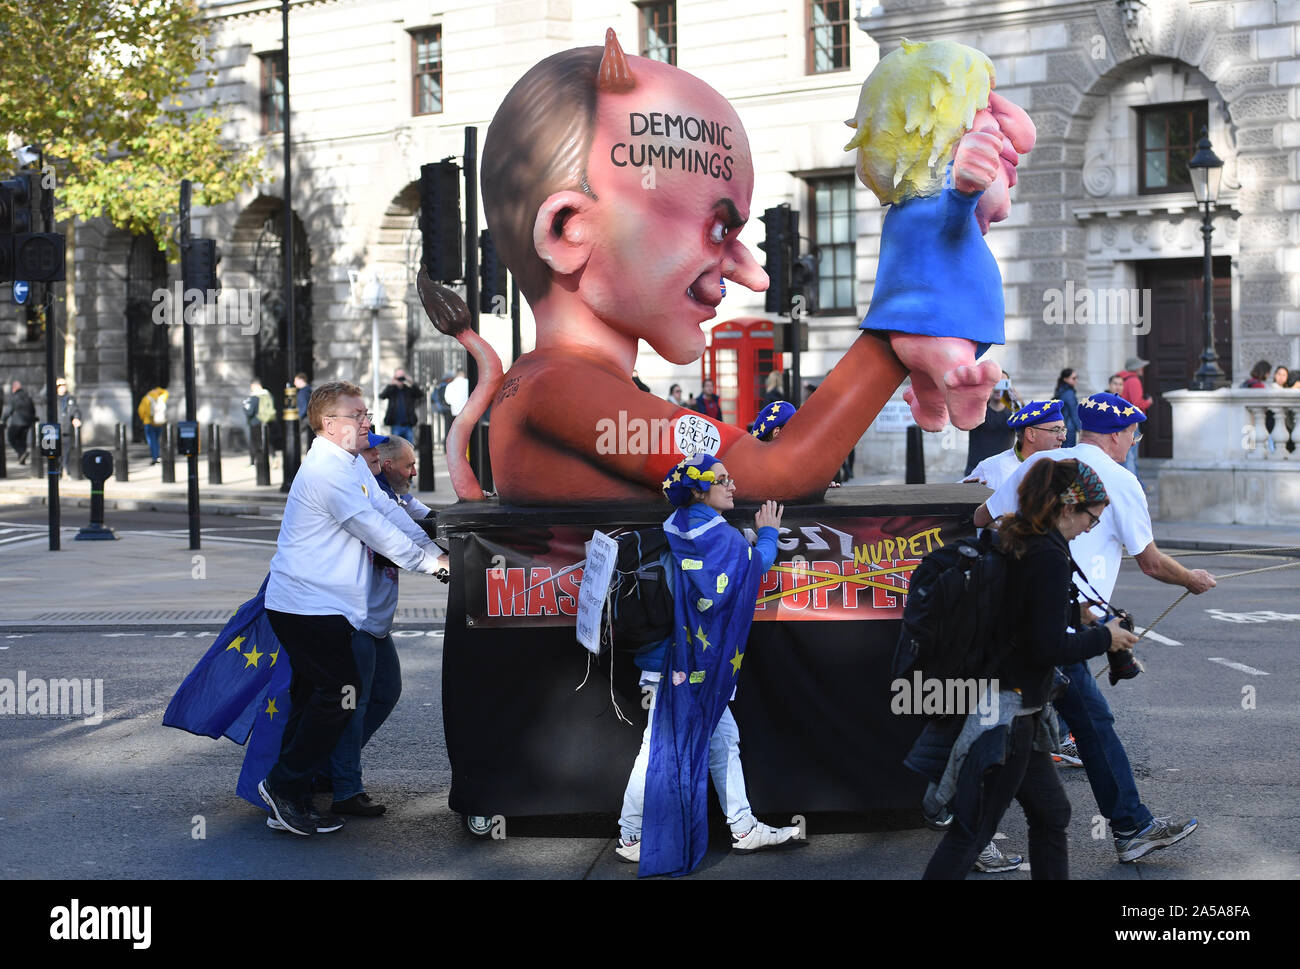 Protesters push a float depicting Dominic Cummings outside the Houses of Parliament in London after Prime Minister Boris Johnson delivered a statement in the House of Commons on his new Brexit deal on what has been dubbed 'Super Saturday'. Stock Photo